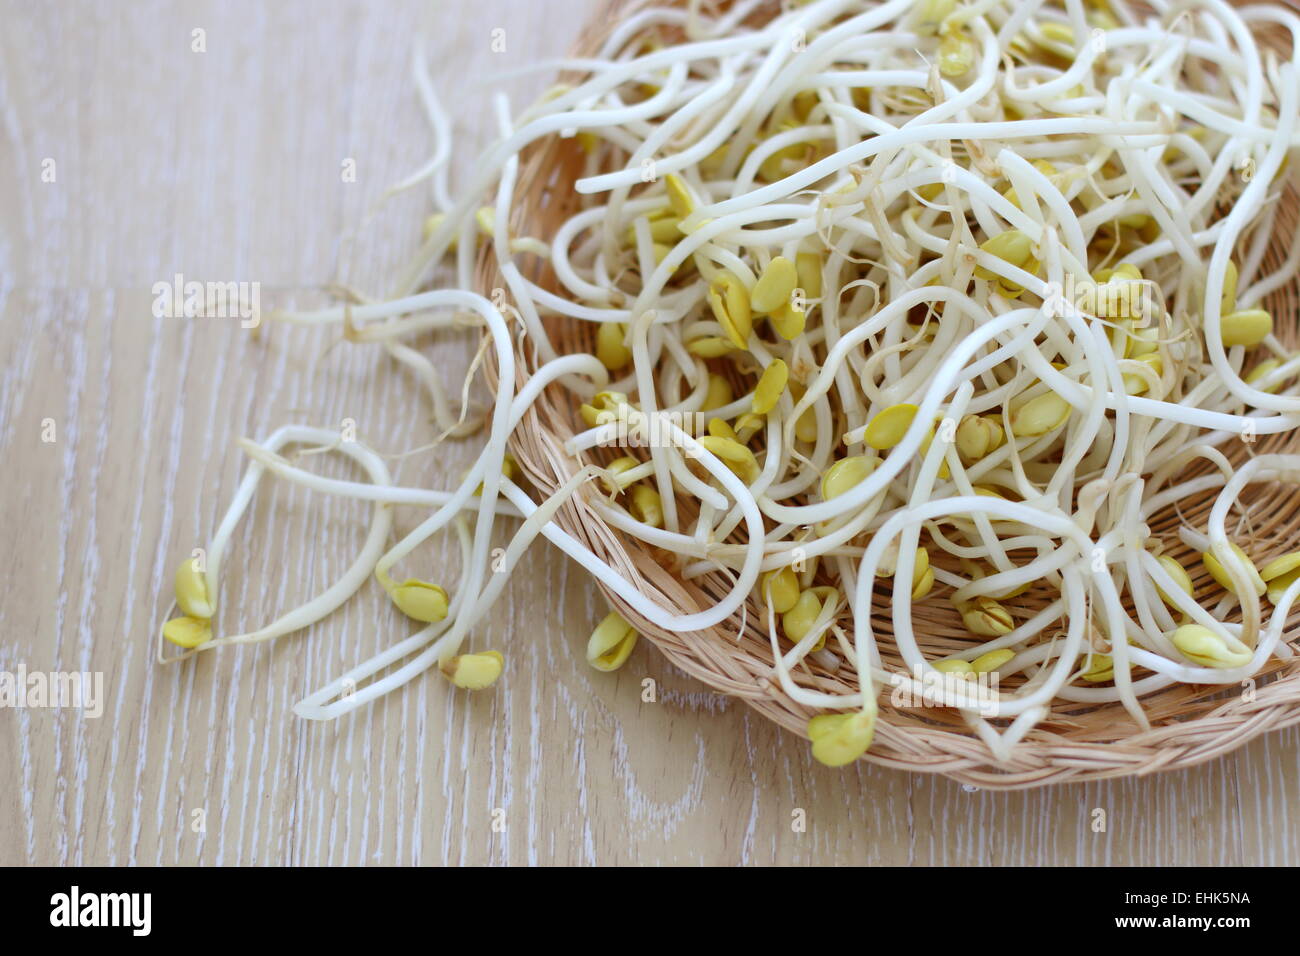 Raw Soy bean sprouts Stock Photo